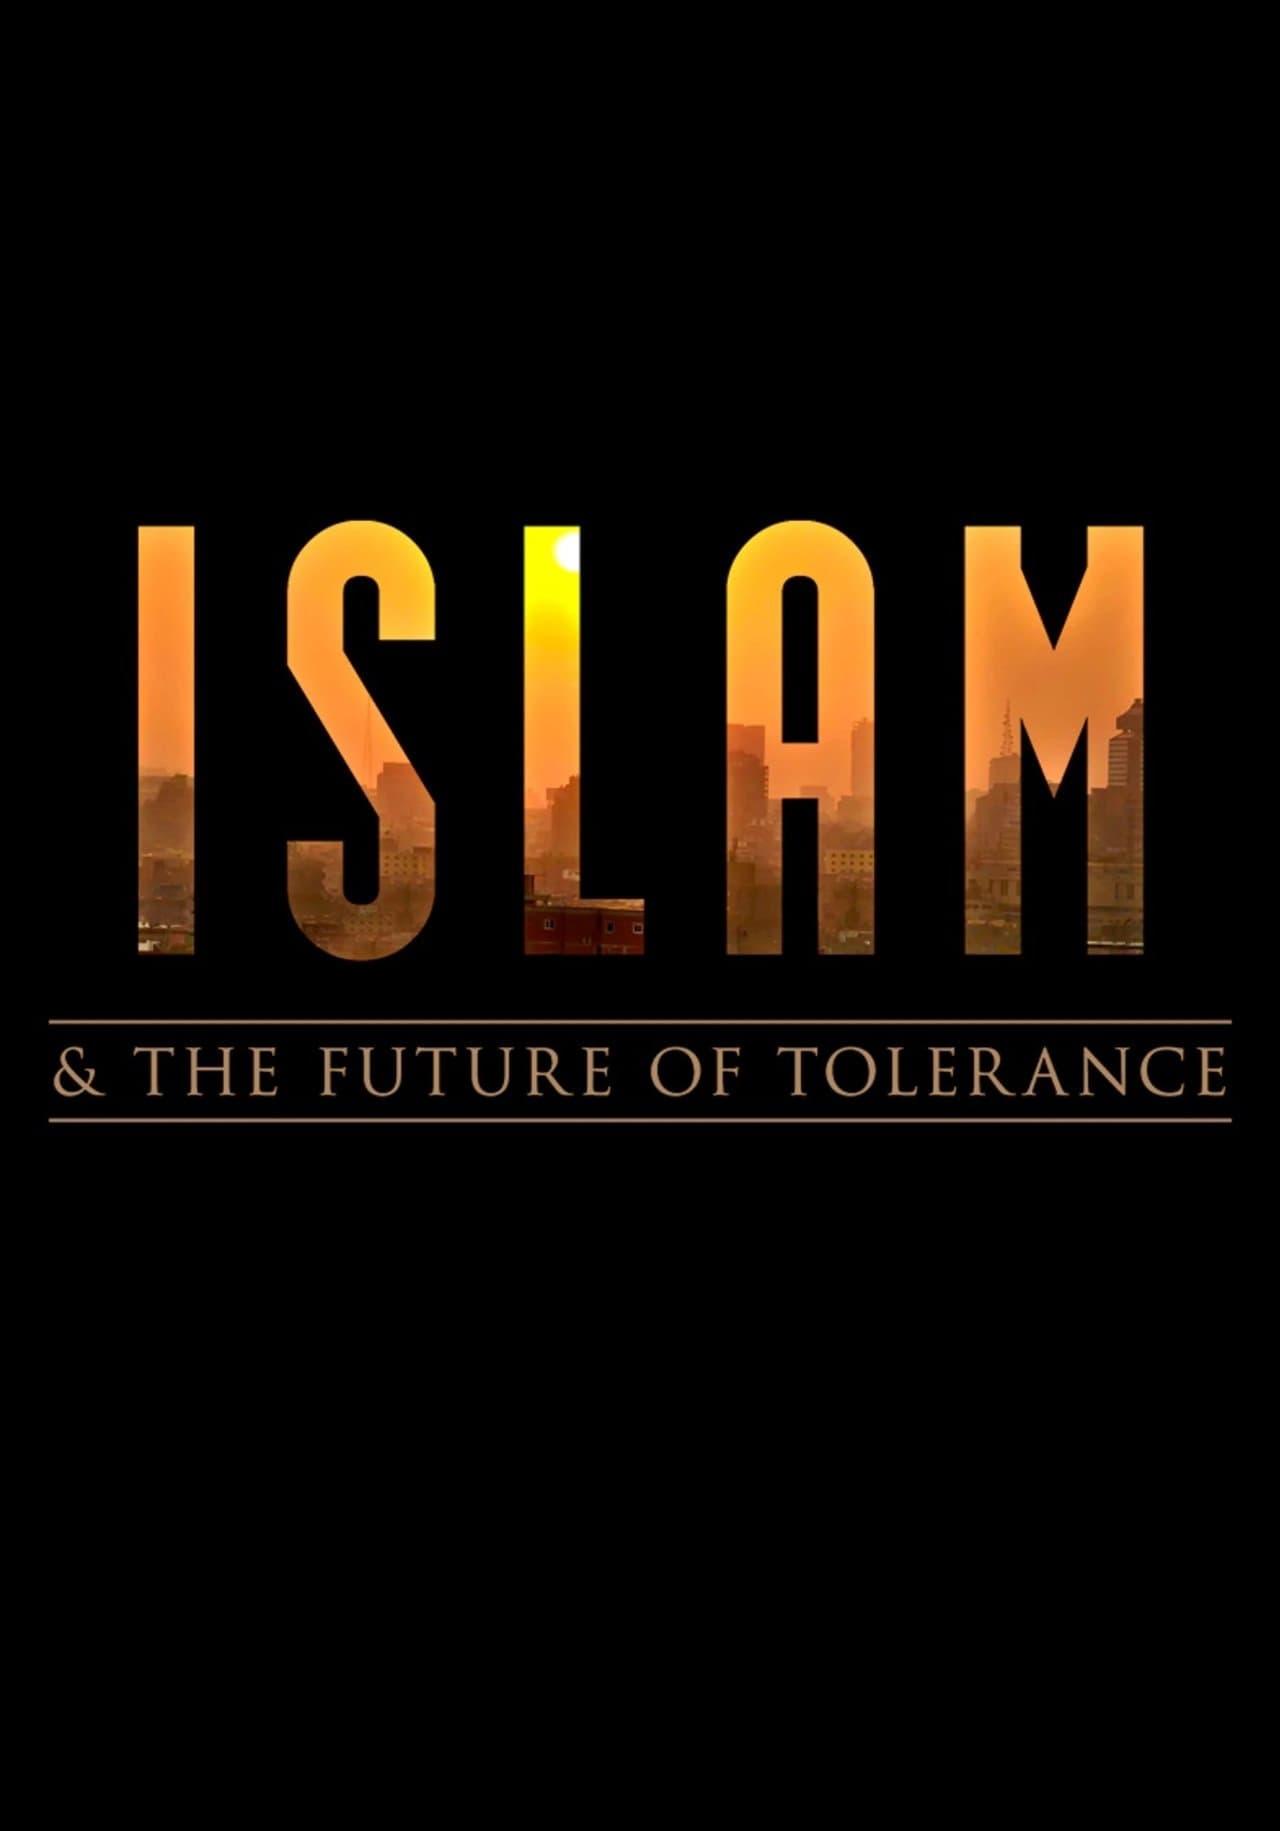 Islam and the Future of Tolerance poster